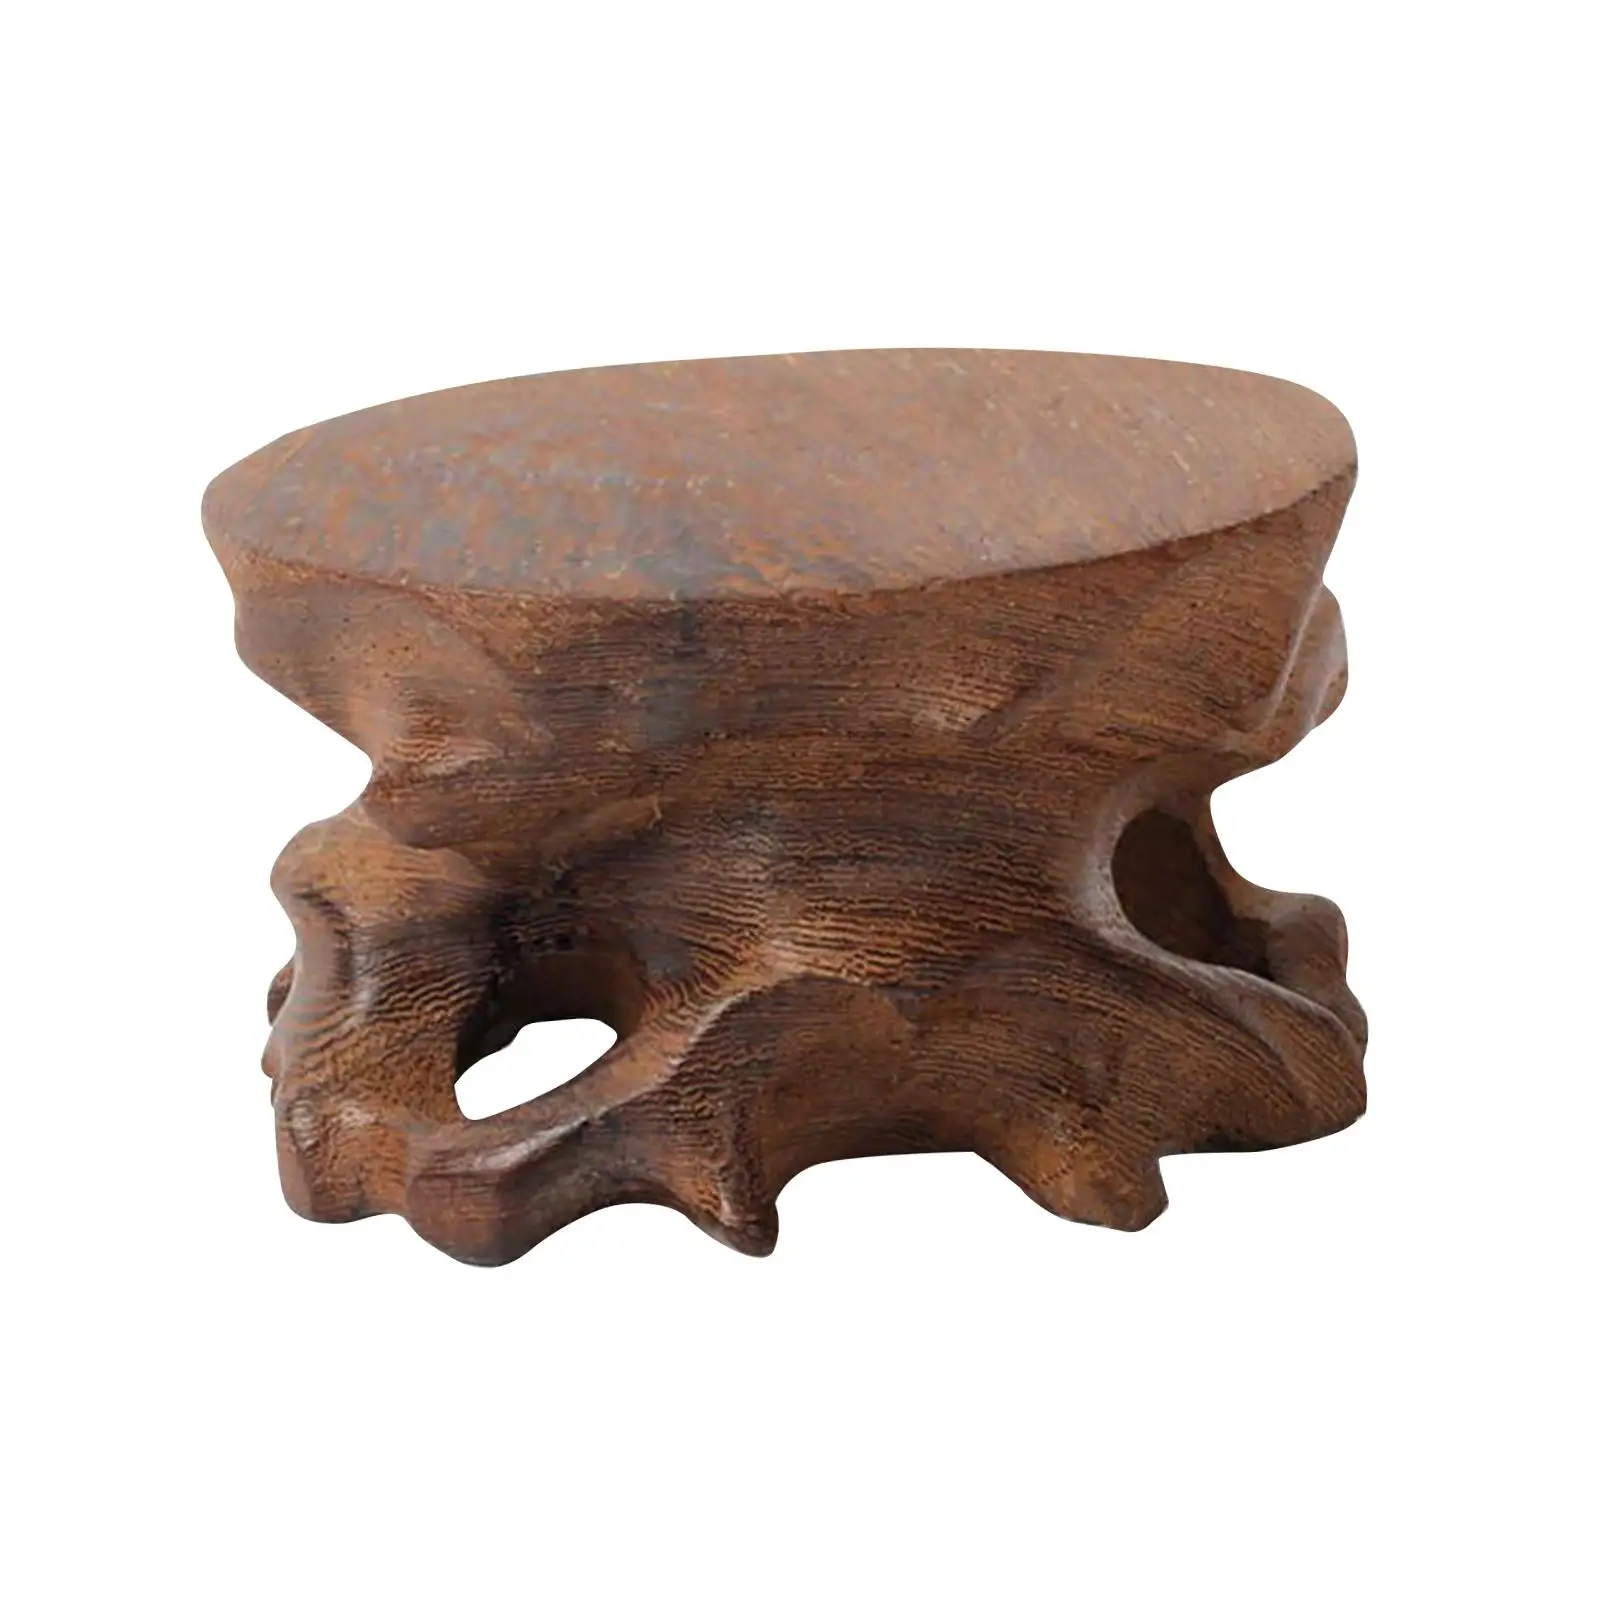 Wooden Stone Display Stand Artware Holder Wood Carving Collectibles Ornament Circular Wooden Base for Desk Office Home Bookshelf